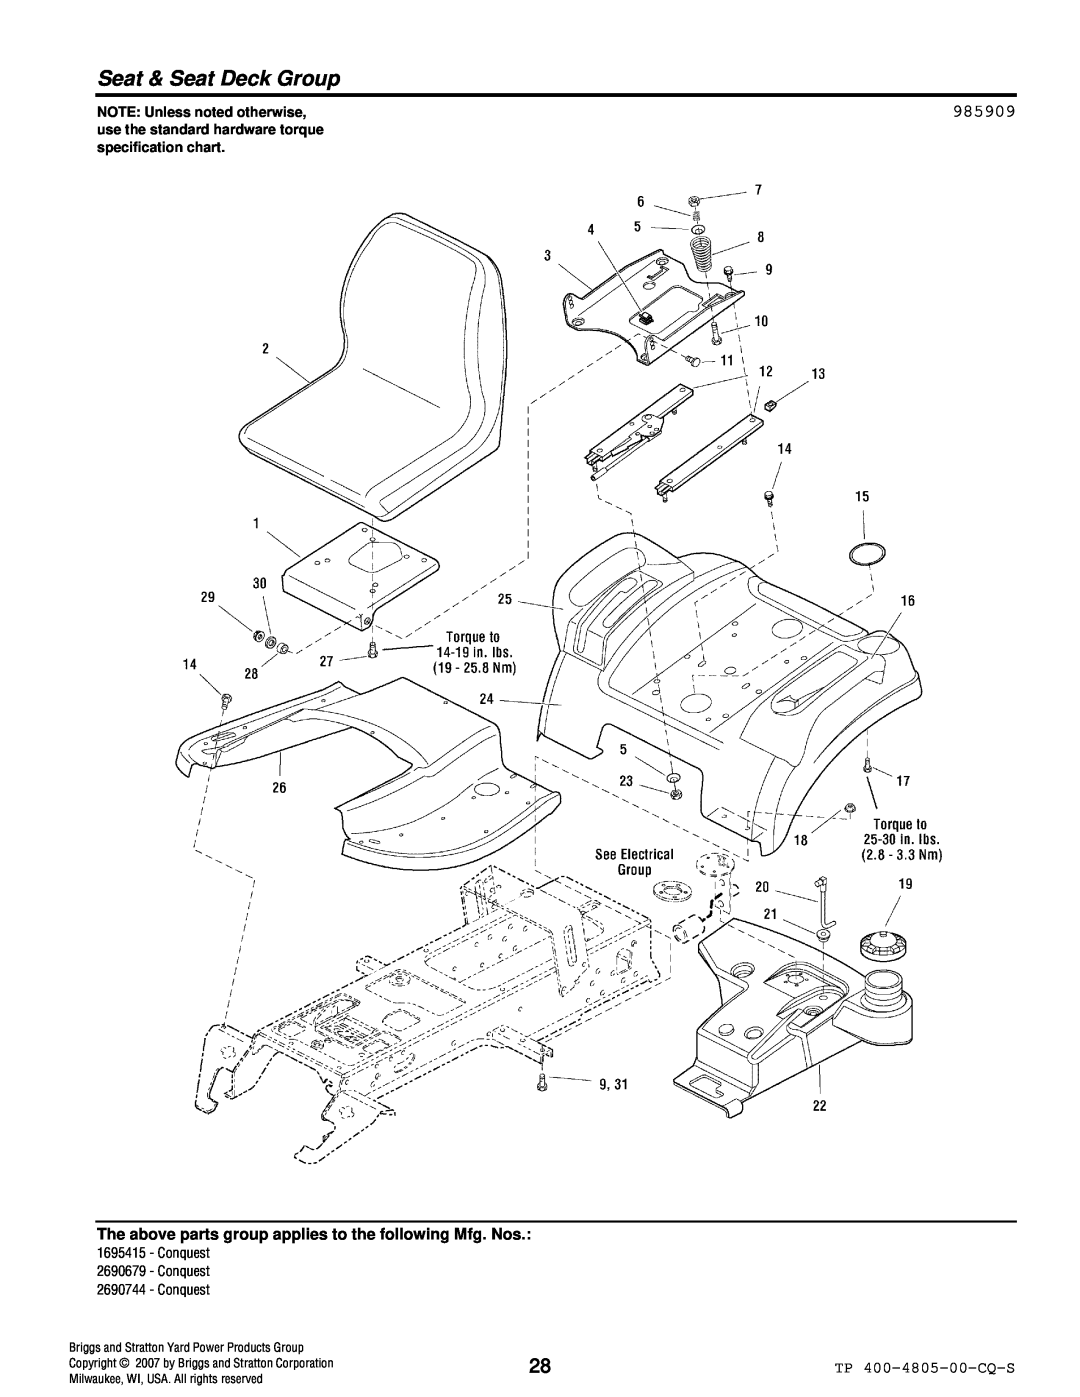 Simplicity 4WD Series manual Seat & Seat Deck Group, 985909, NOTE: Unless noted otherwise 